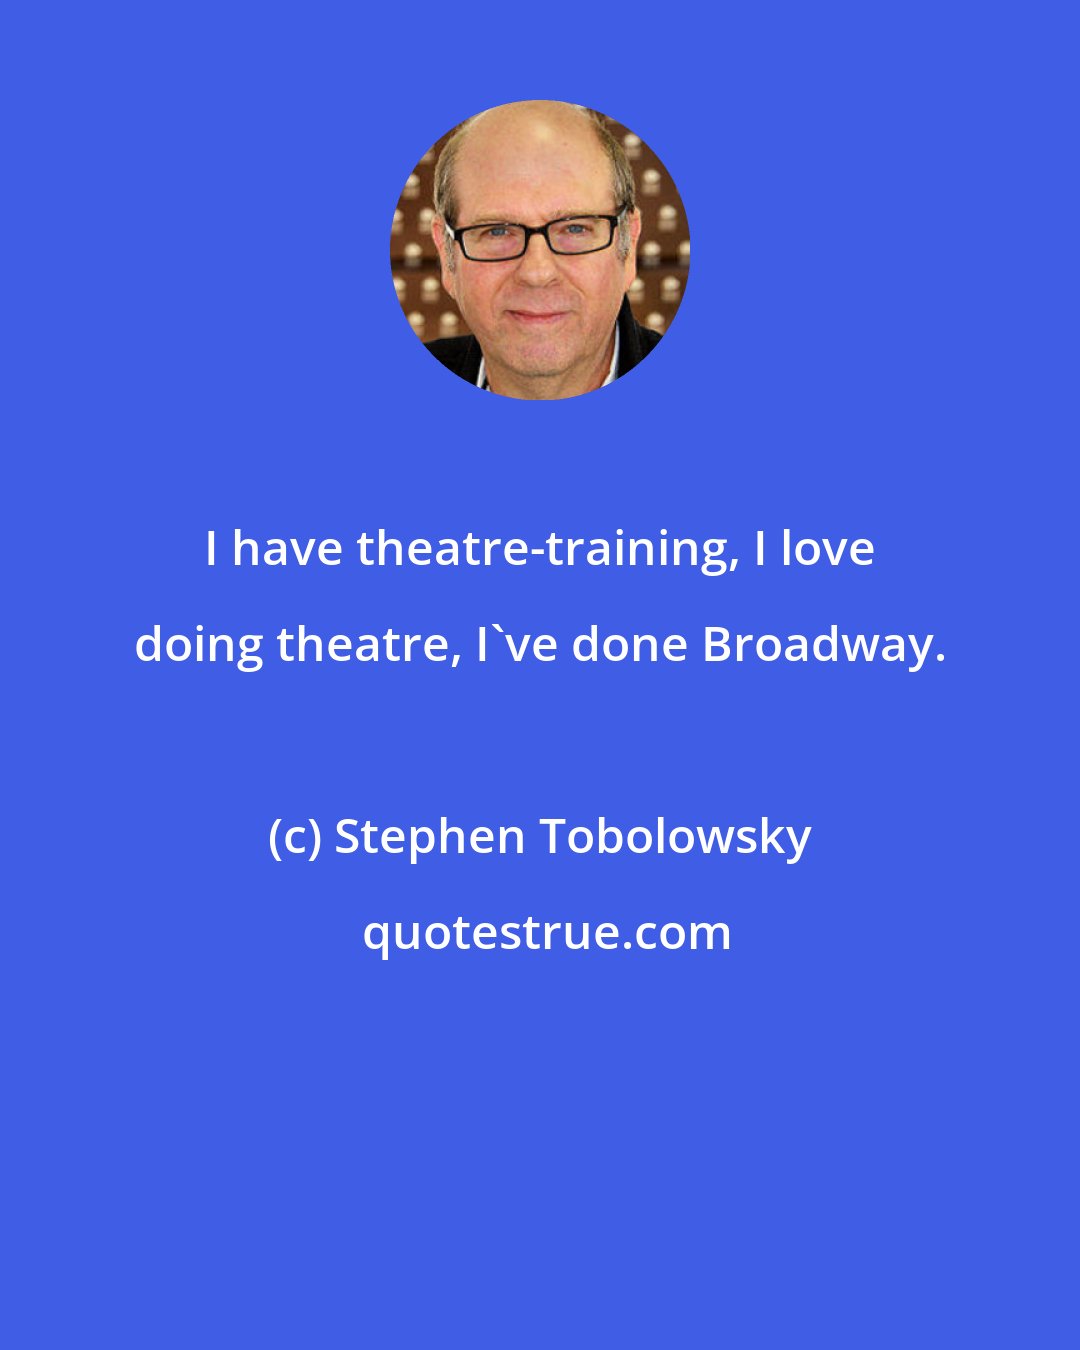 Stephen Tobolowsky: I have theatre-training, I love doing theatre, I've done Broadway.